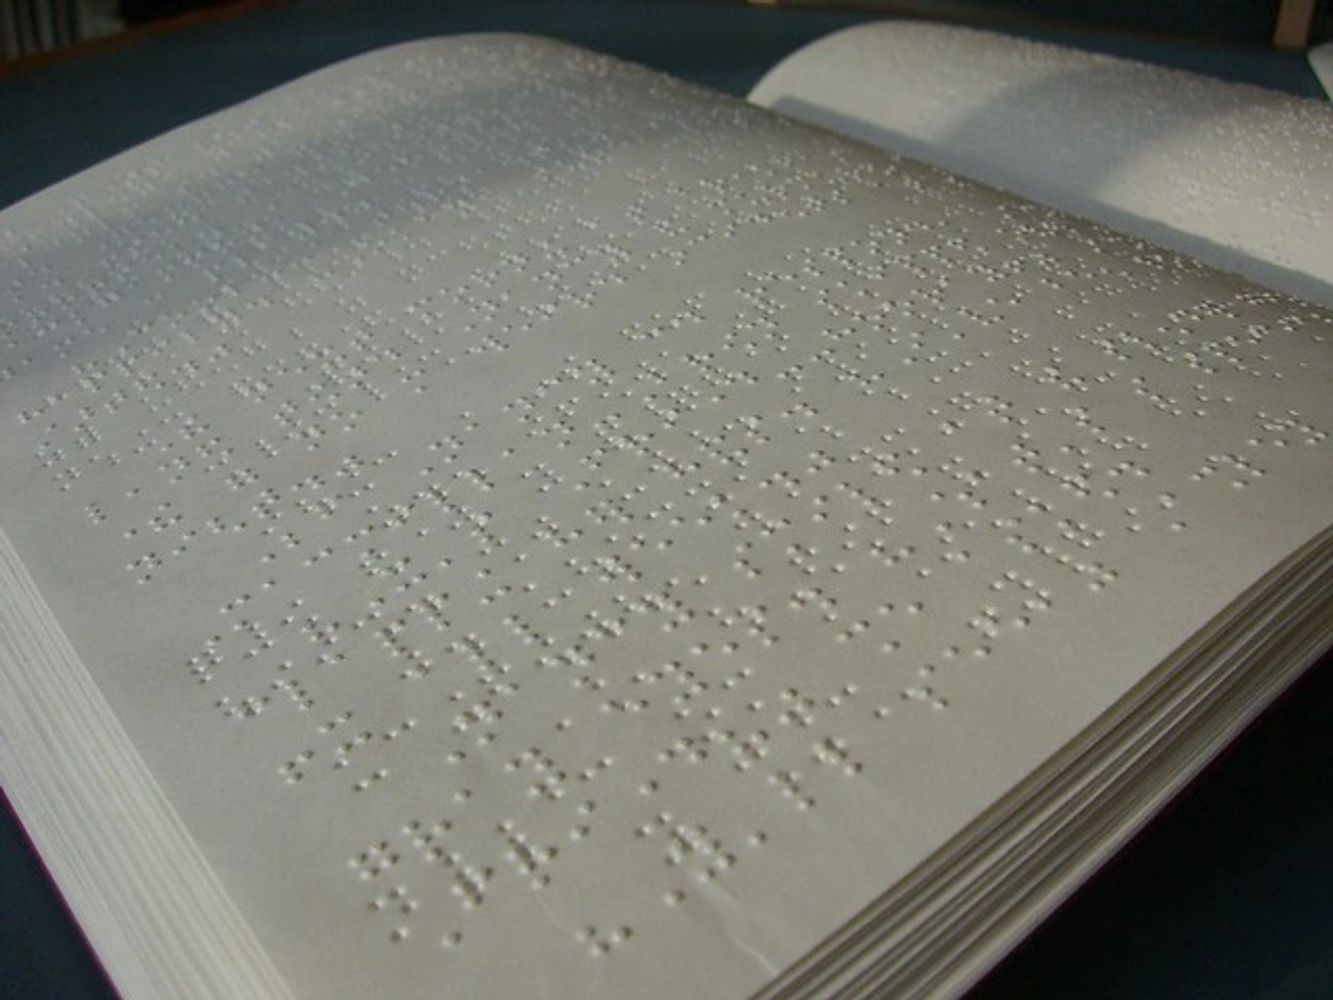 Book with braille on the pages on a black background.